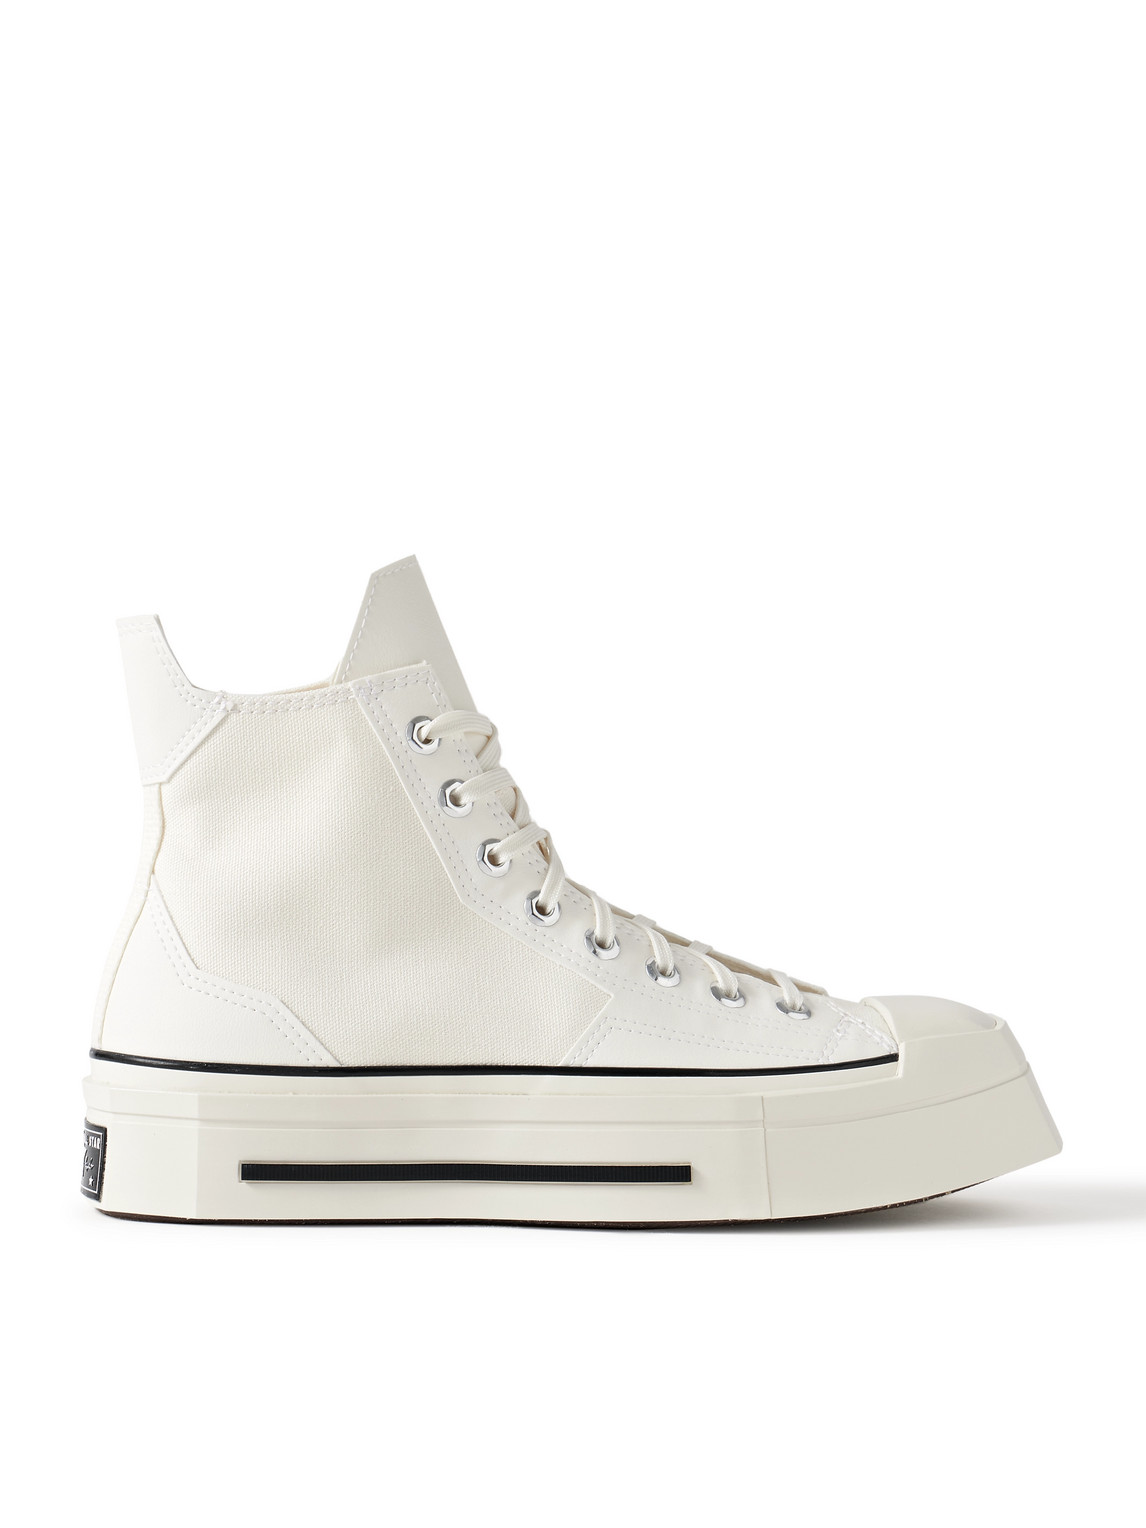 Chuck 70 De Luxe Leather and Canvas Platform High-Top Sneakers